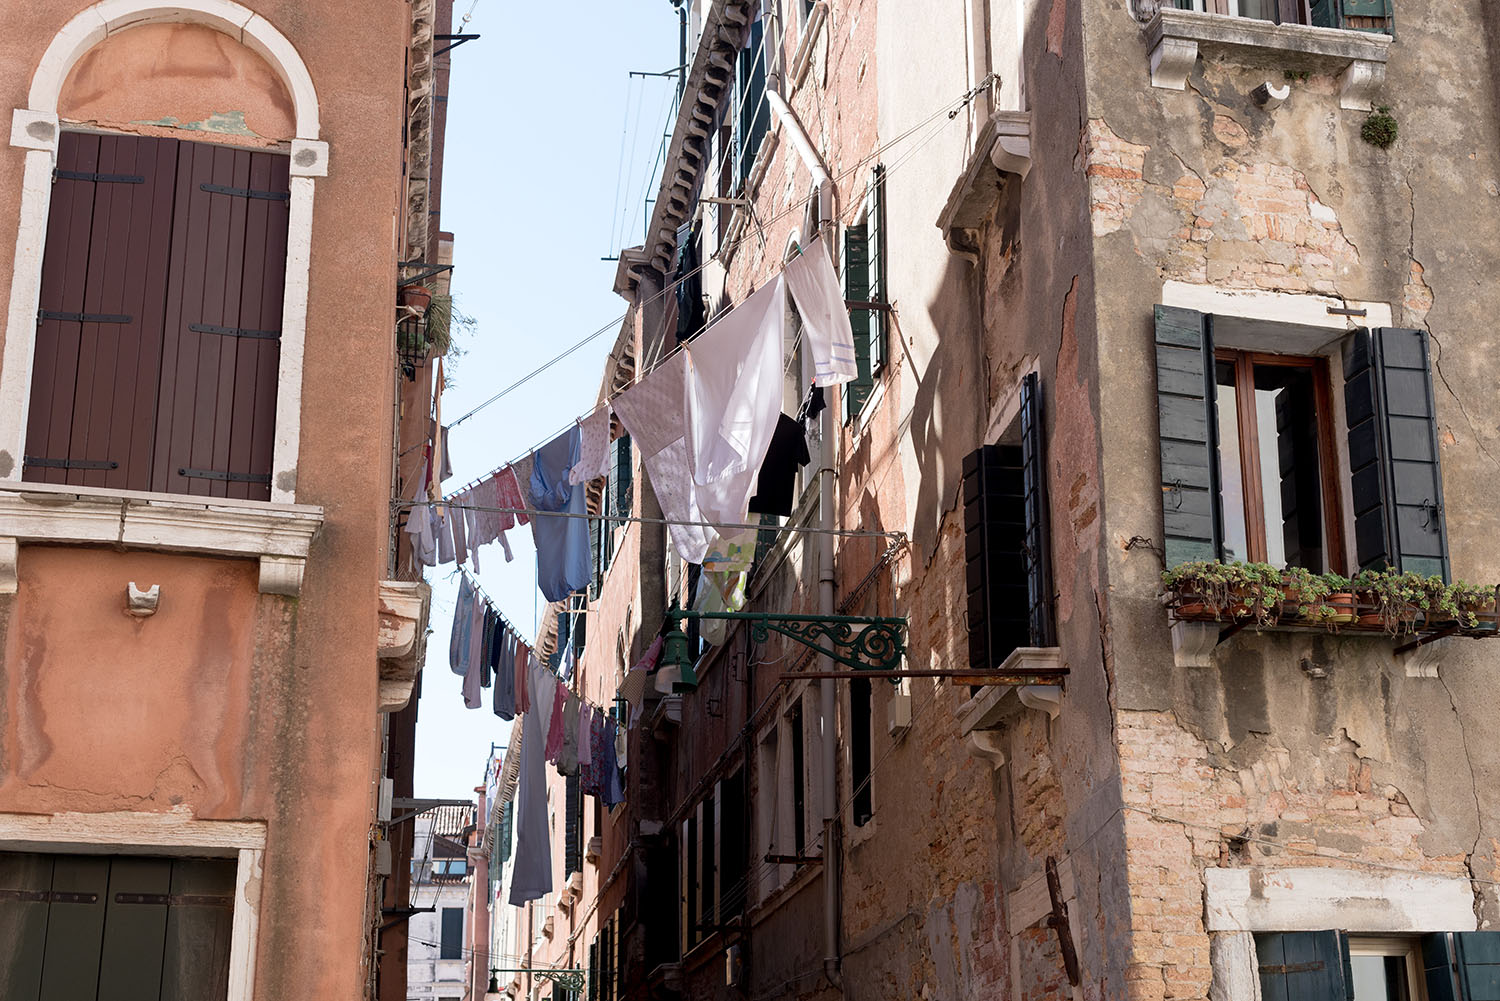 Laundry hangs between residential buildings in Venice, as photographed by top Canadian travel blogger Cee Fardoe of Coco & Vera